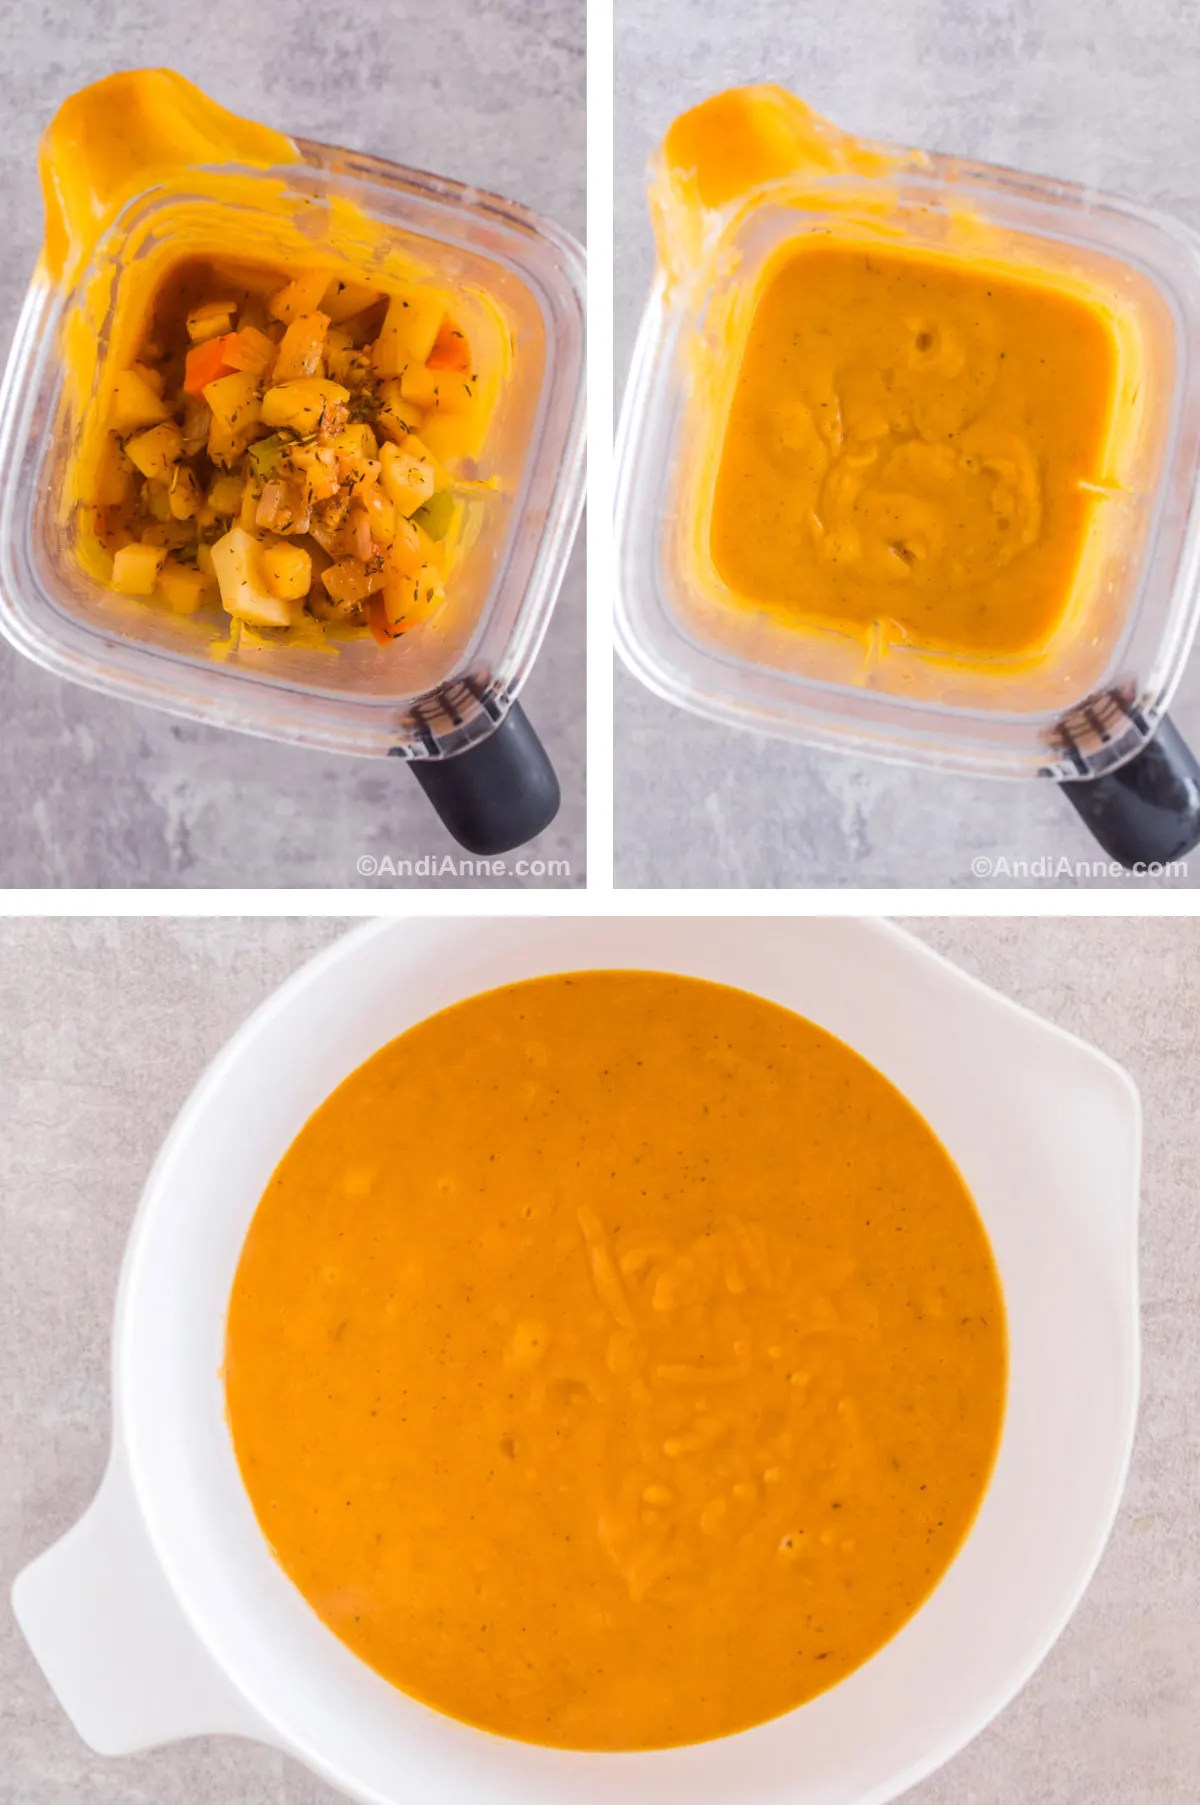 Three overhead images in one: 1. Ingredients fill half of a blender cup. 2. Ingredients are blended. 3. Blended soup is added to a large white bowl. 